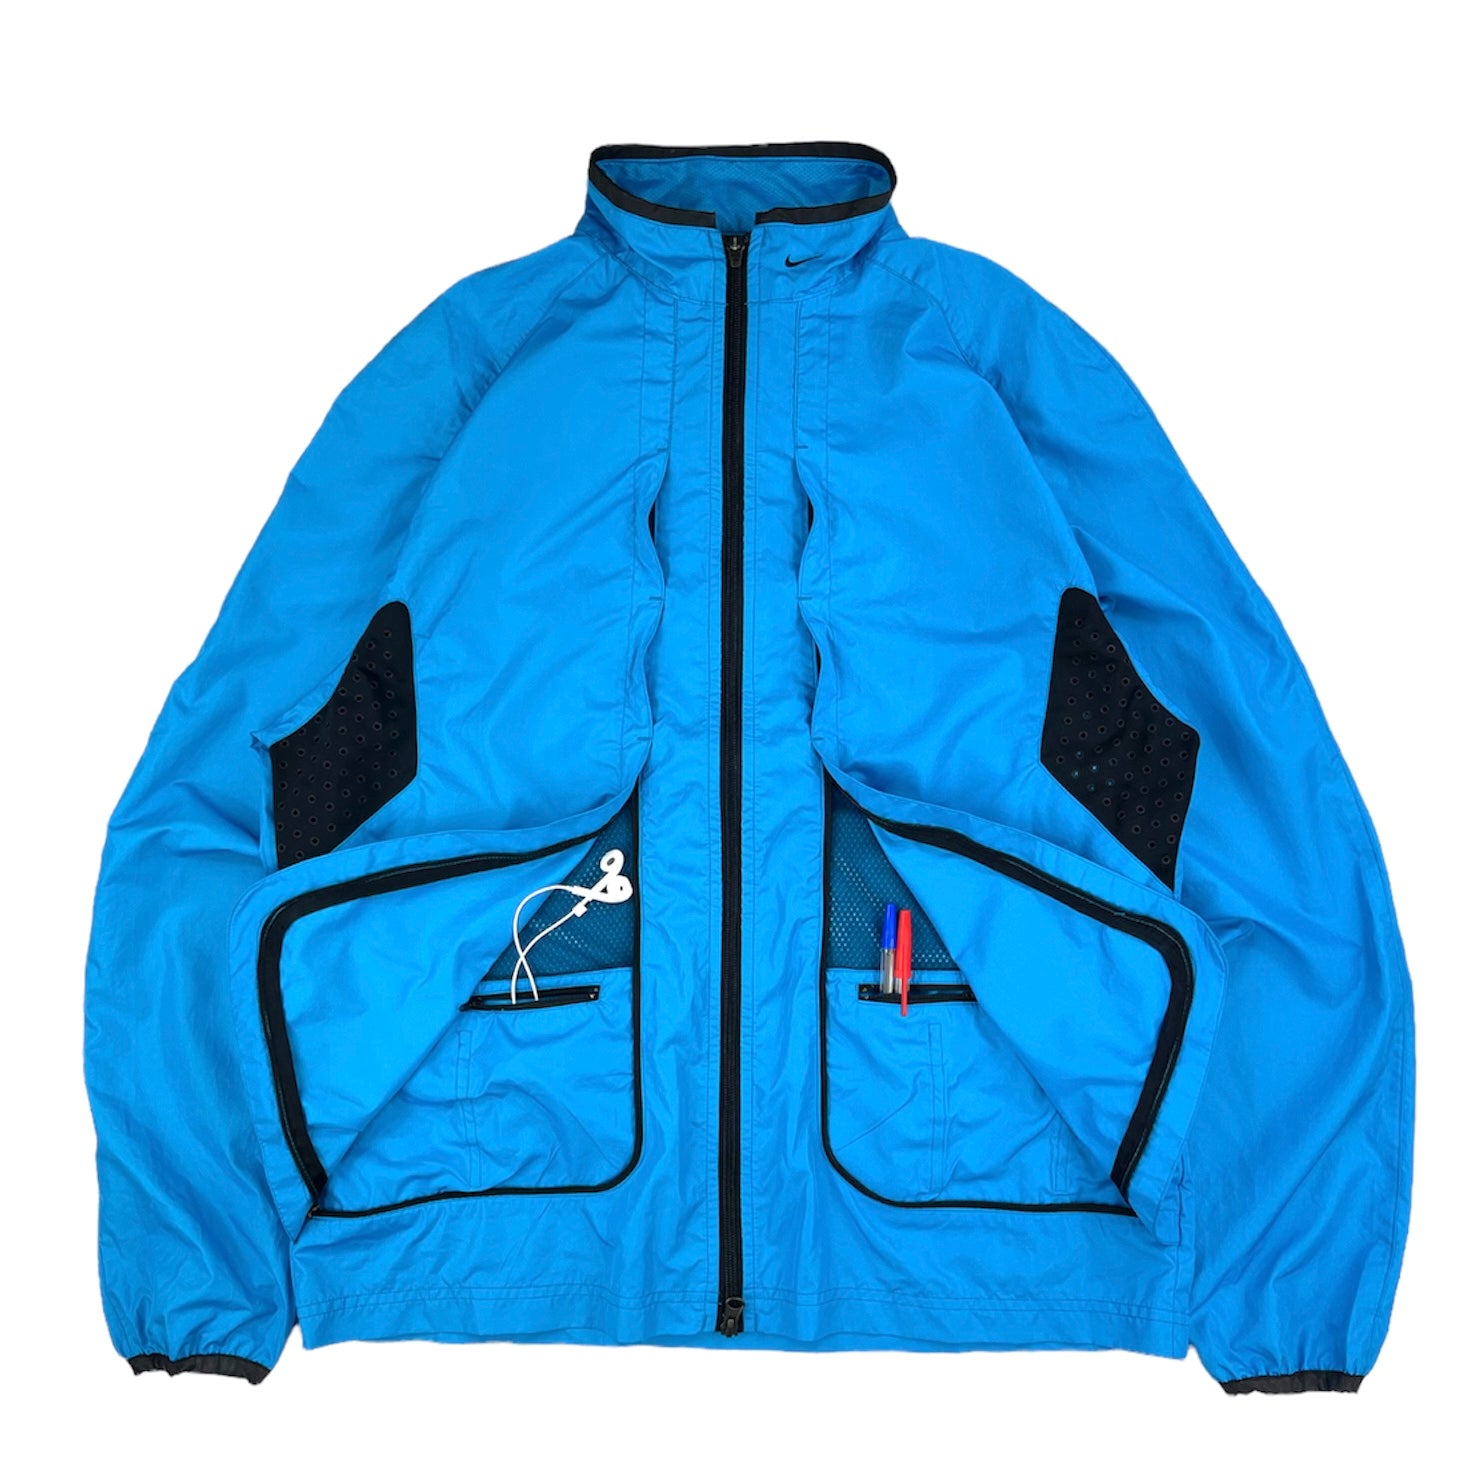 2000s Nike Clima.Fit concealed butterfly pocket jacket